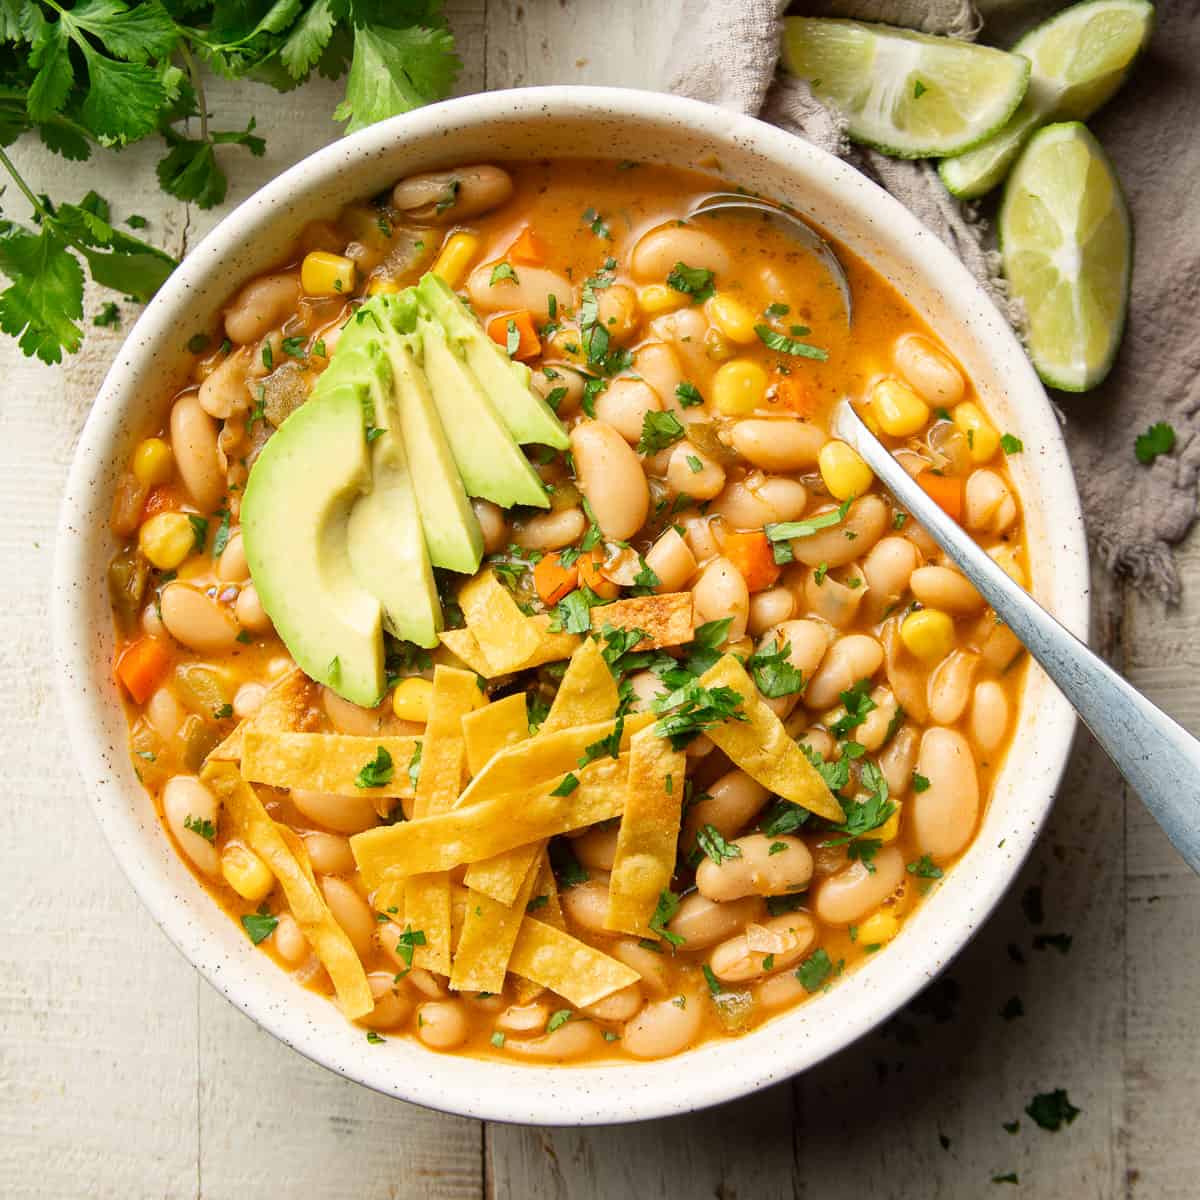 Bowl of Vegan White Bean Chili with avocado and tortilla strips on top.